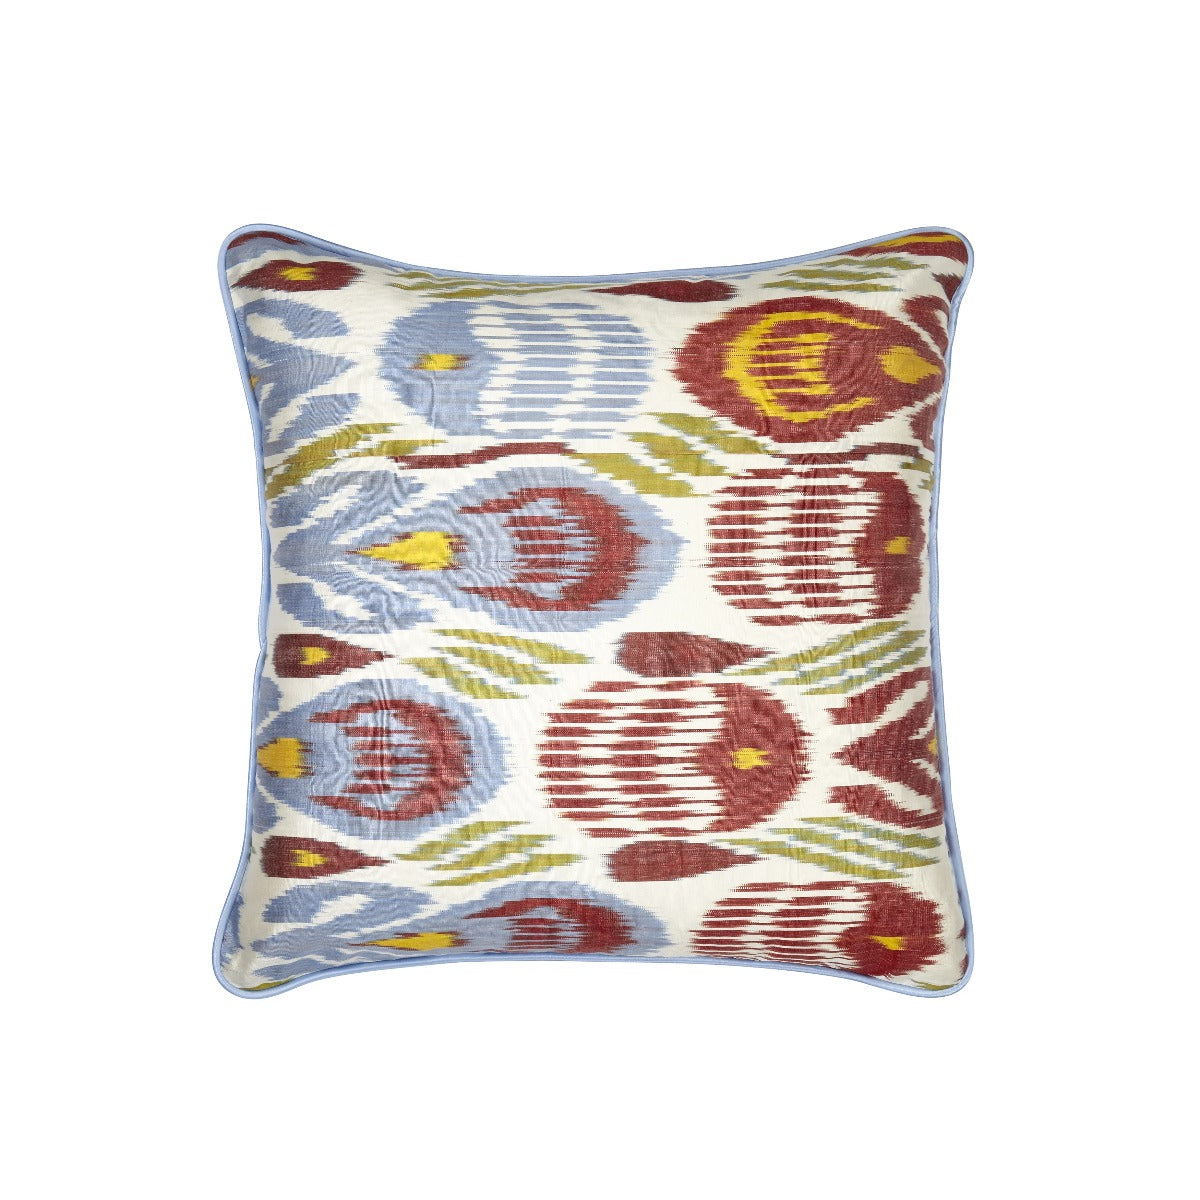 Luxury Silk Square Green, Red, Blue and Yellow Ikat Cushion